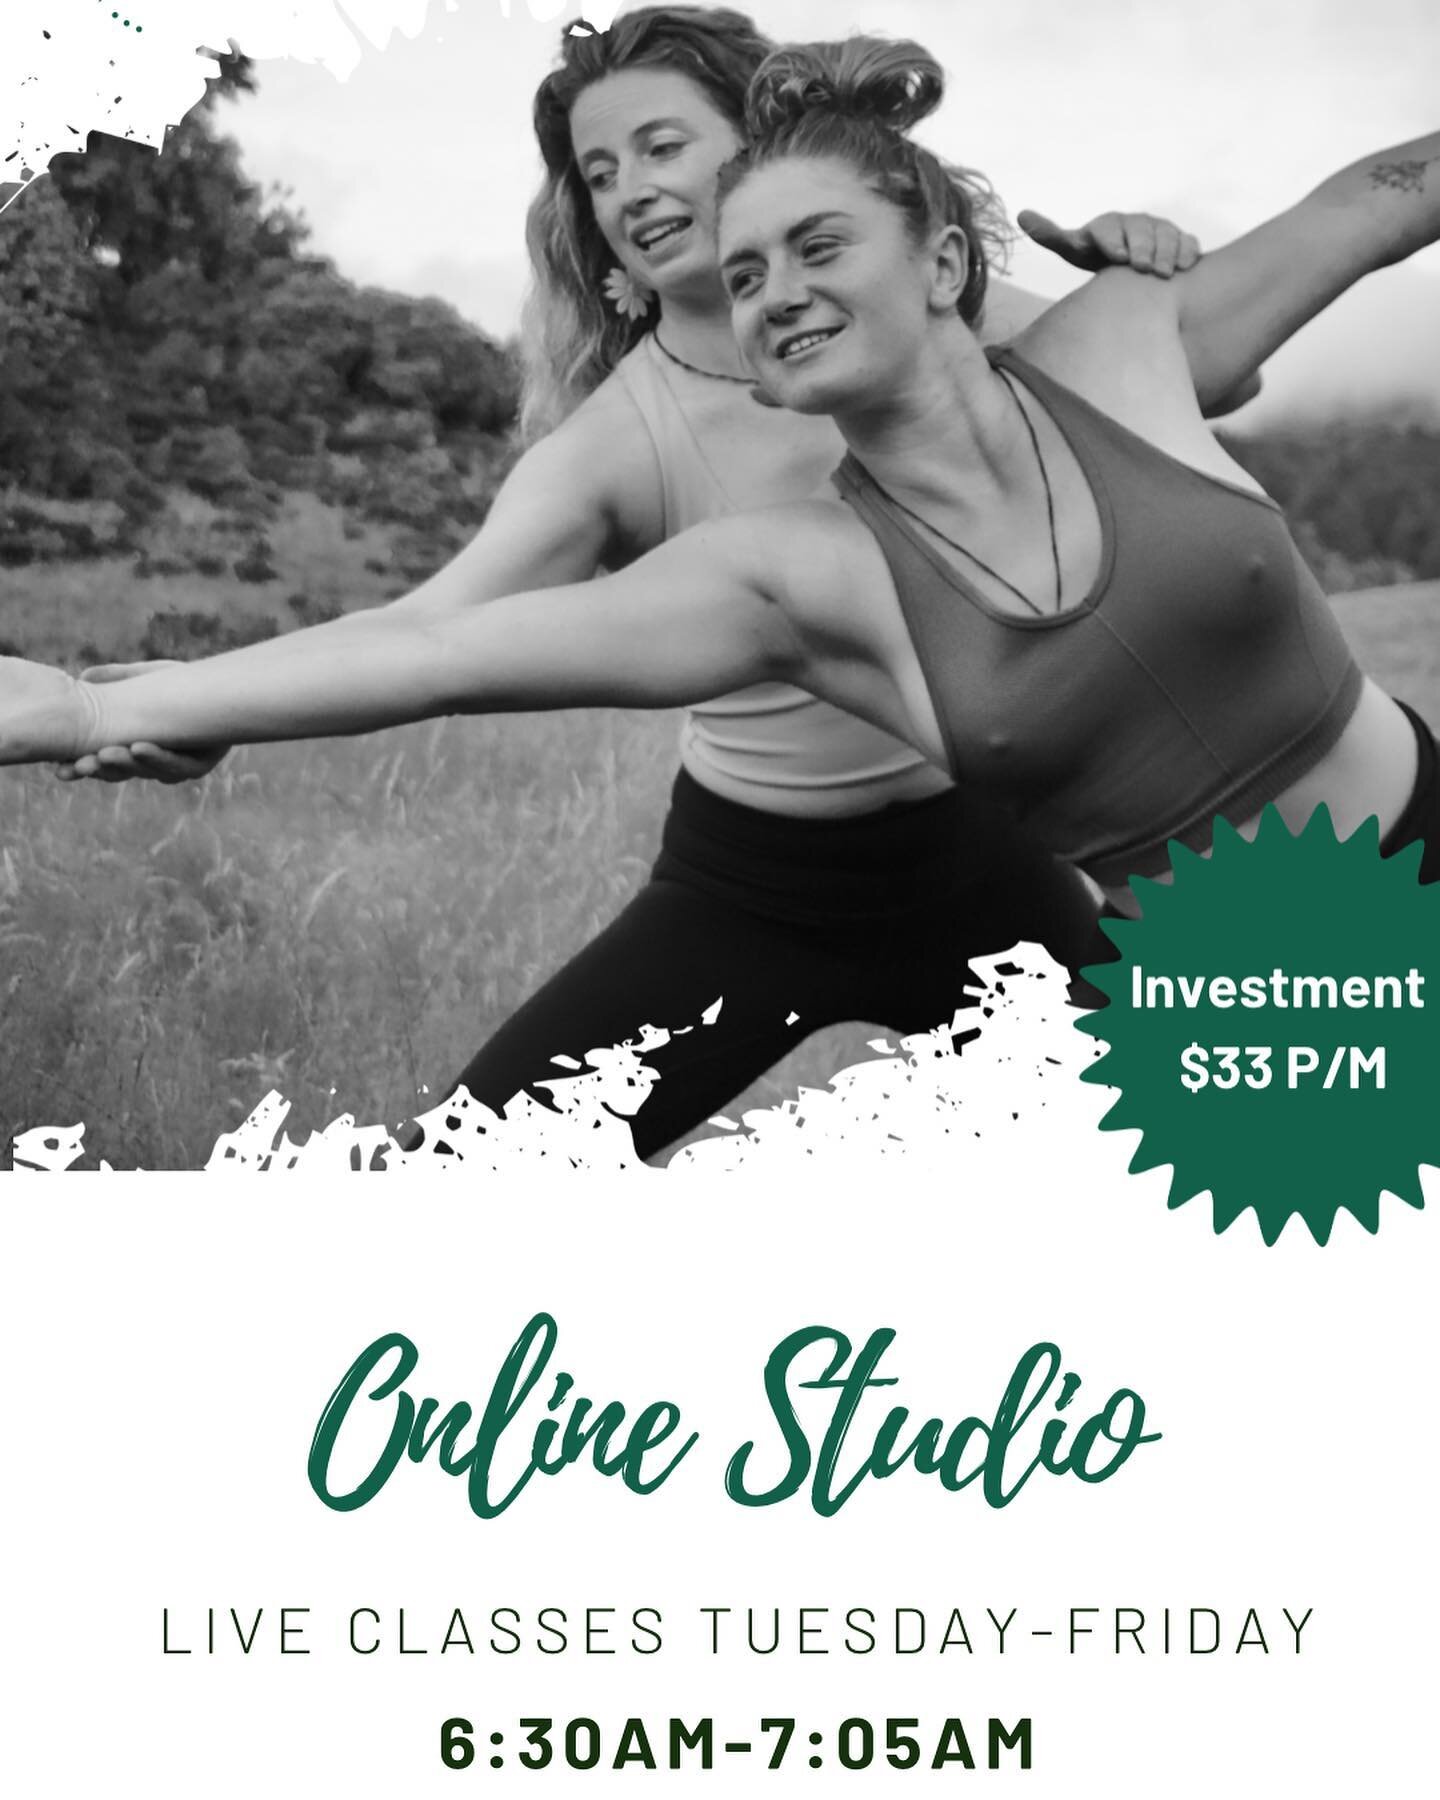 Term 2 - Online Studio

Join us for Morning Movement, accountability &amp; connection.

👉🏼 x4 live movement classes per week

👉🏼 Access to over 300 recorded meditations, movements &amp; yoga classes

👉🏼 x2 workshops per month

Education for you